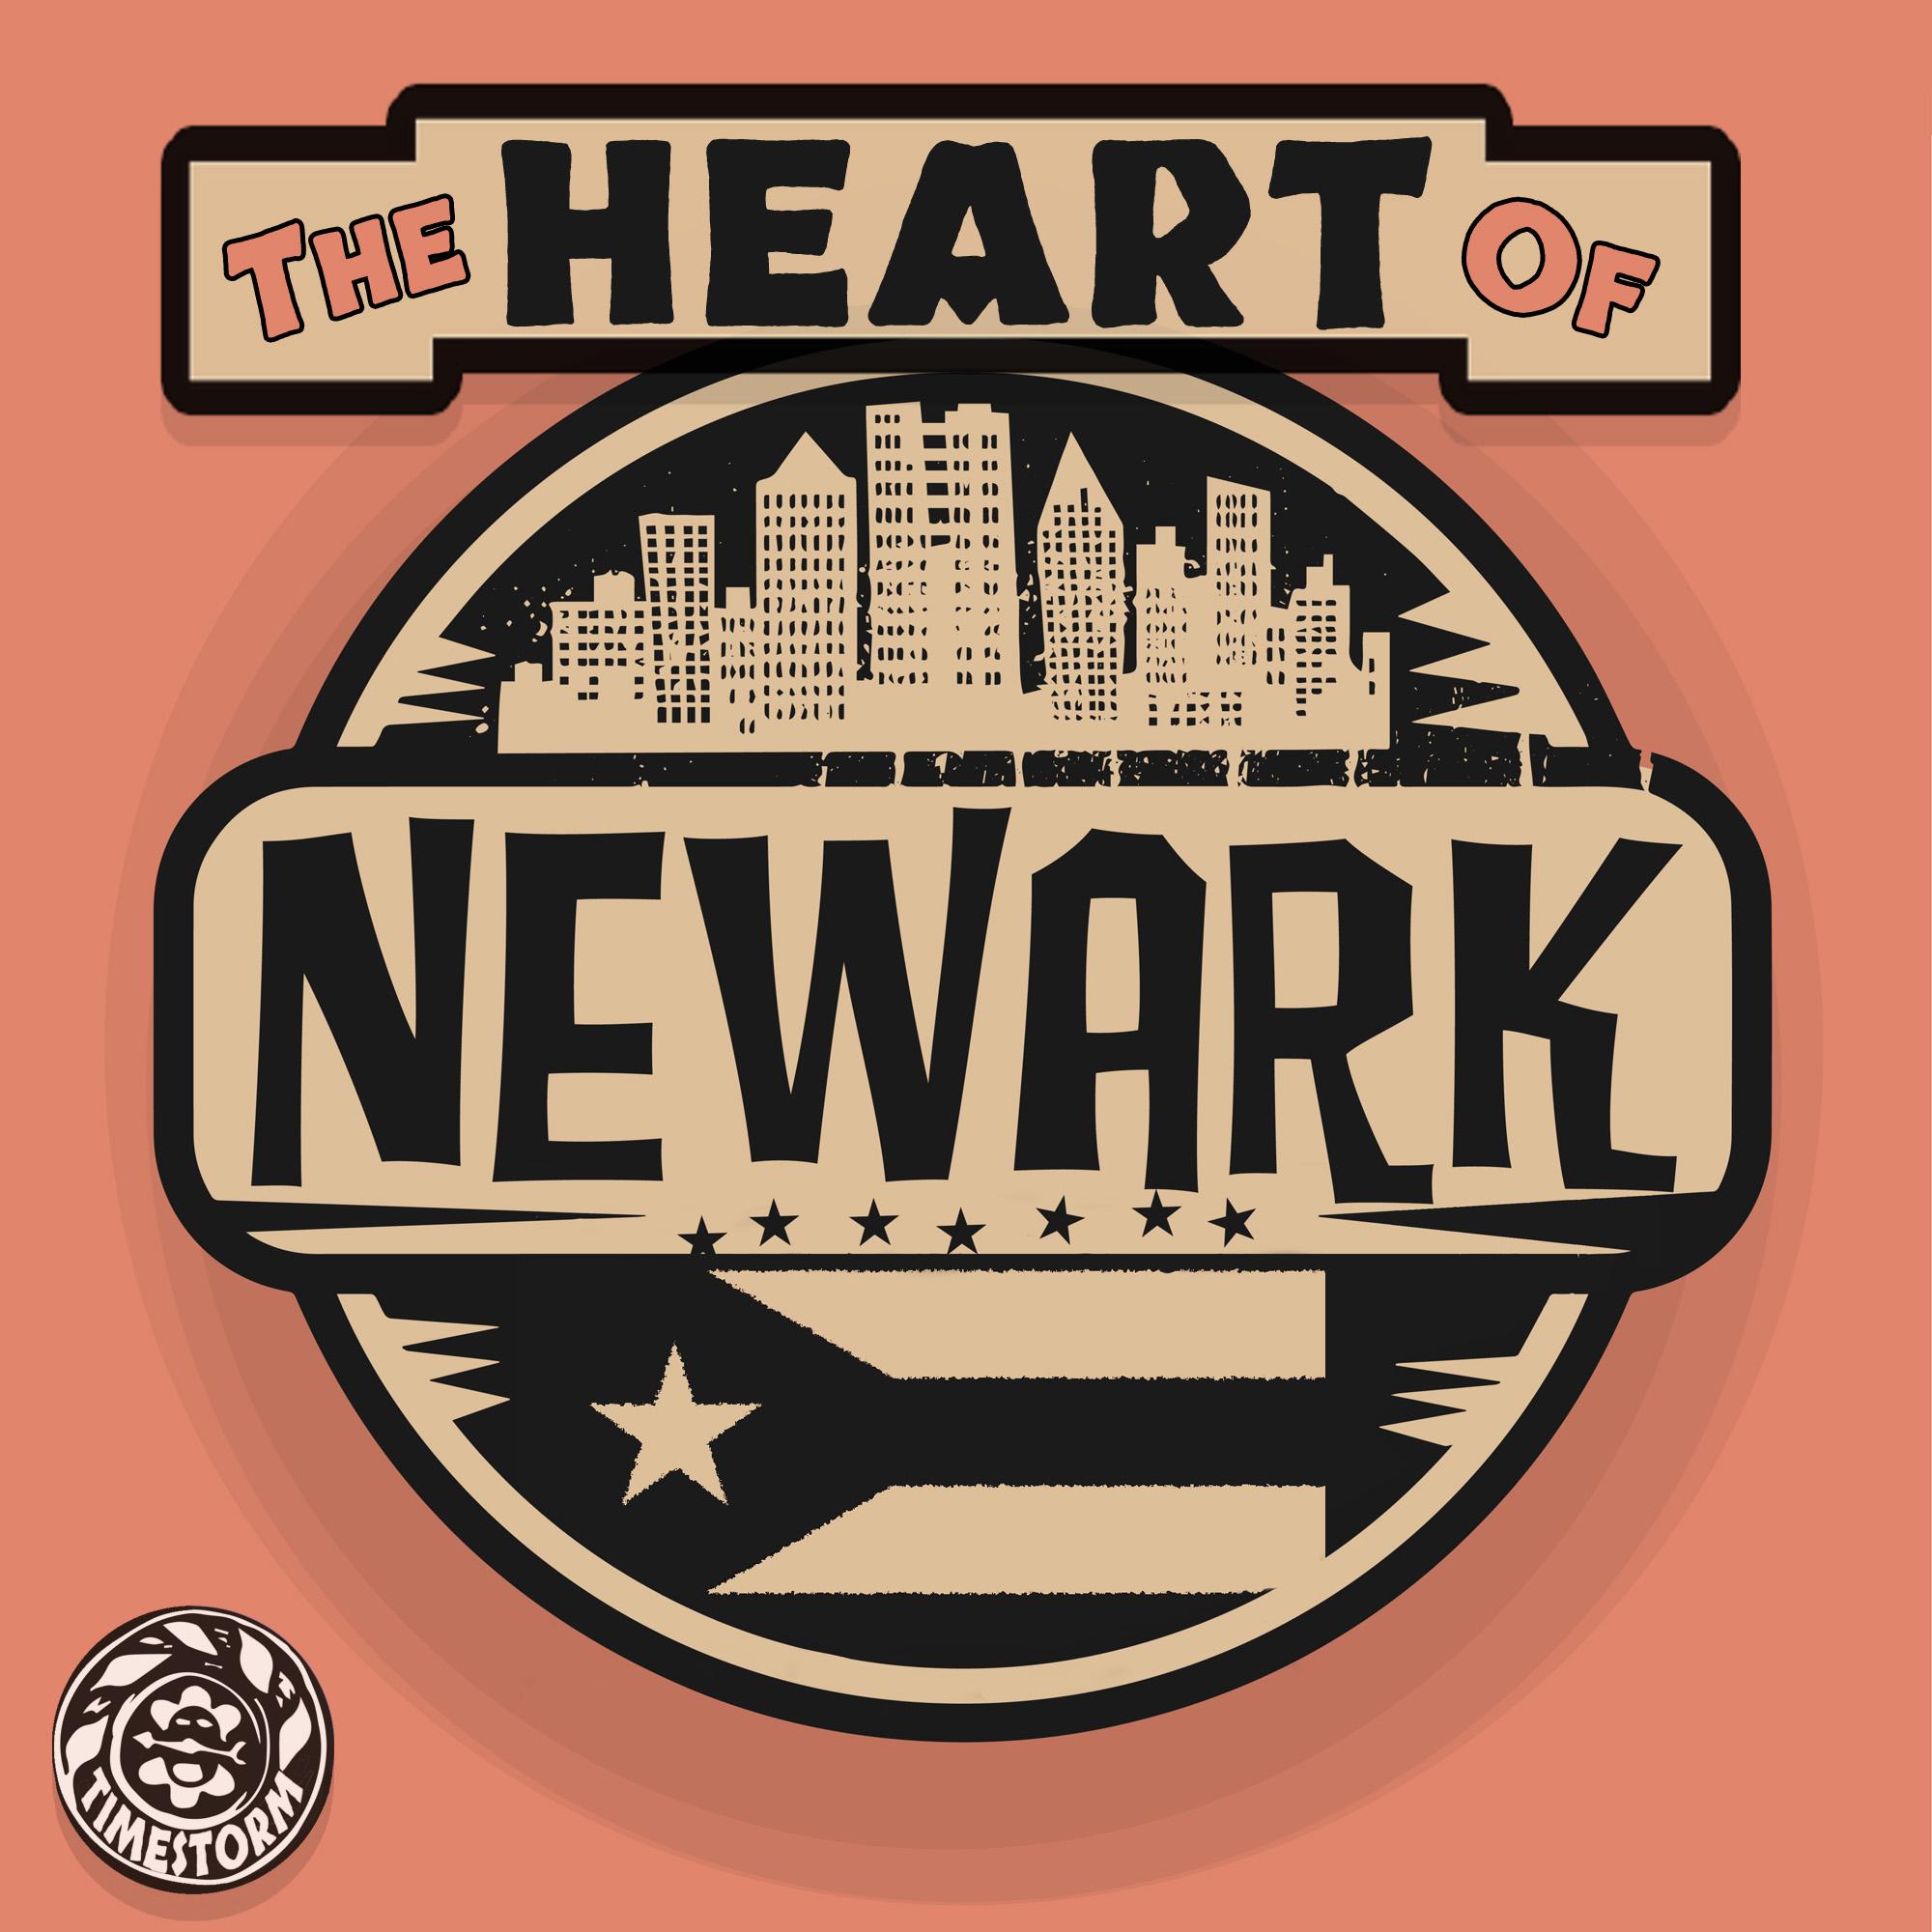 Thumbnail for "Special: The Heart of Newark".